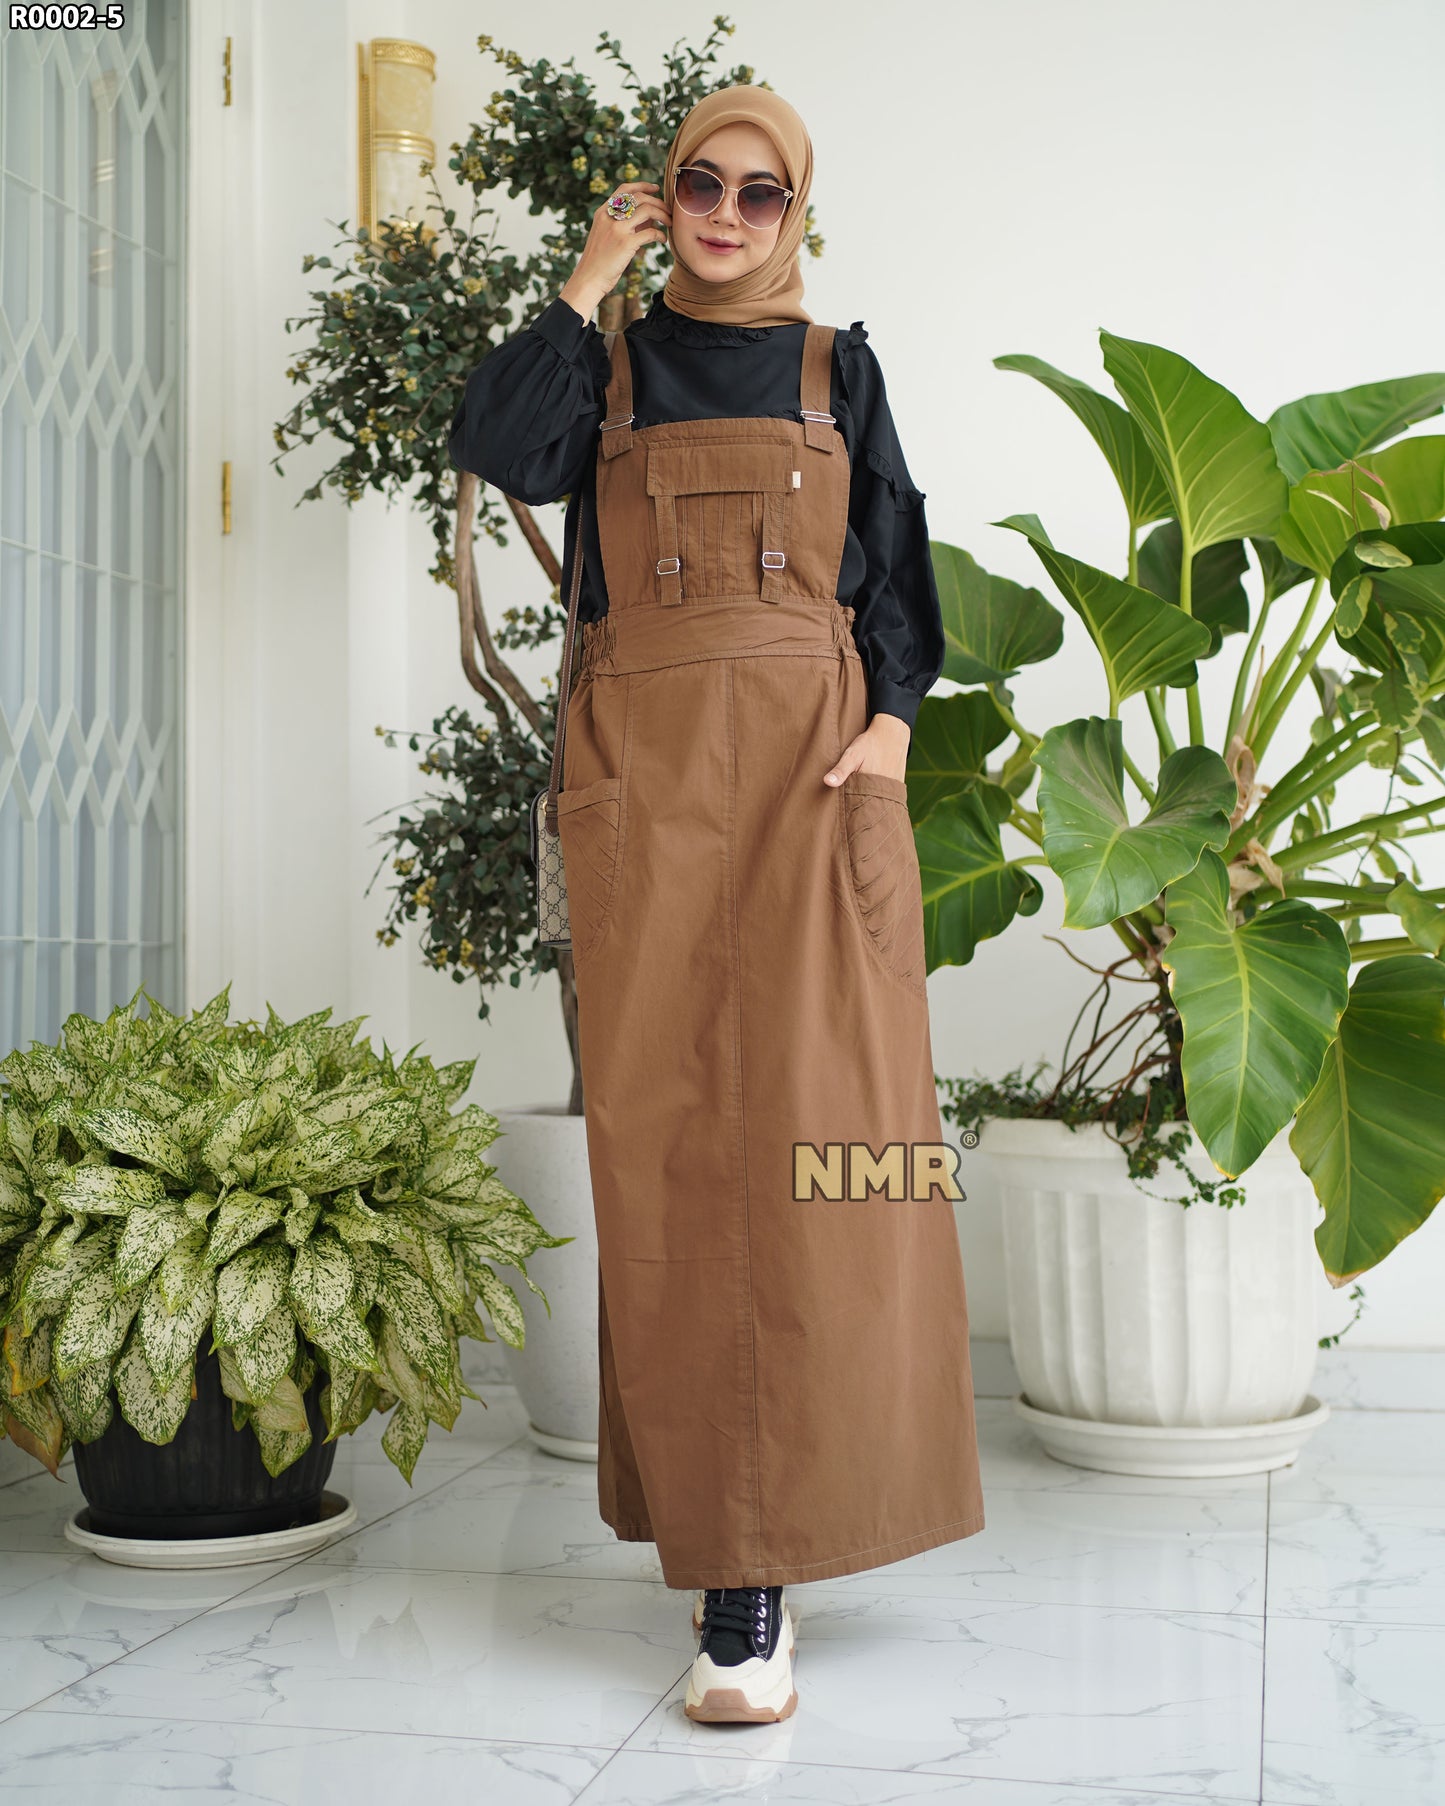 NMR Gamis Jumpsuit Overall Baby Canvas Vol R002-5